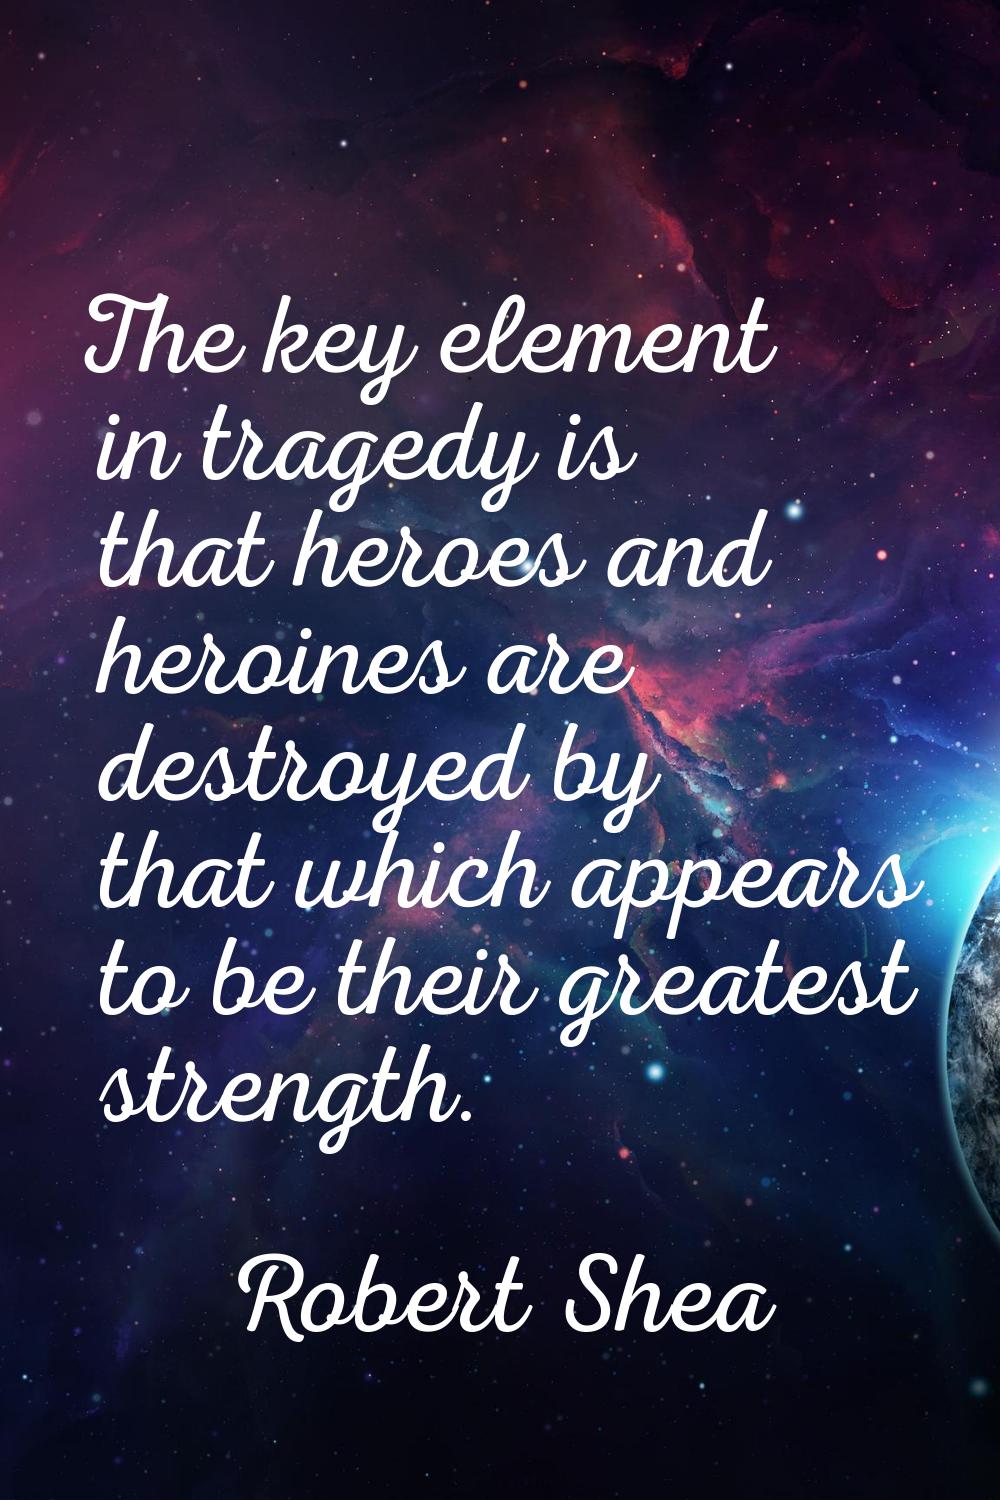 The key element in tragedy is that heroes and heroines are destroyed by that which appears to be th